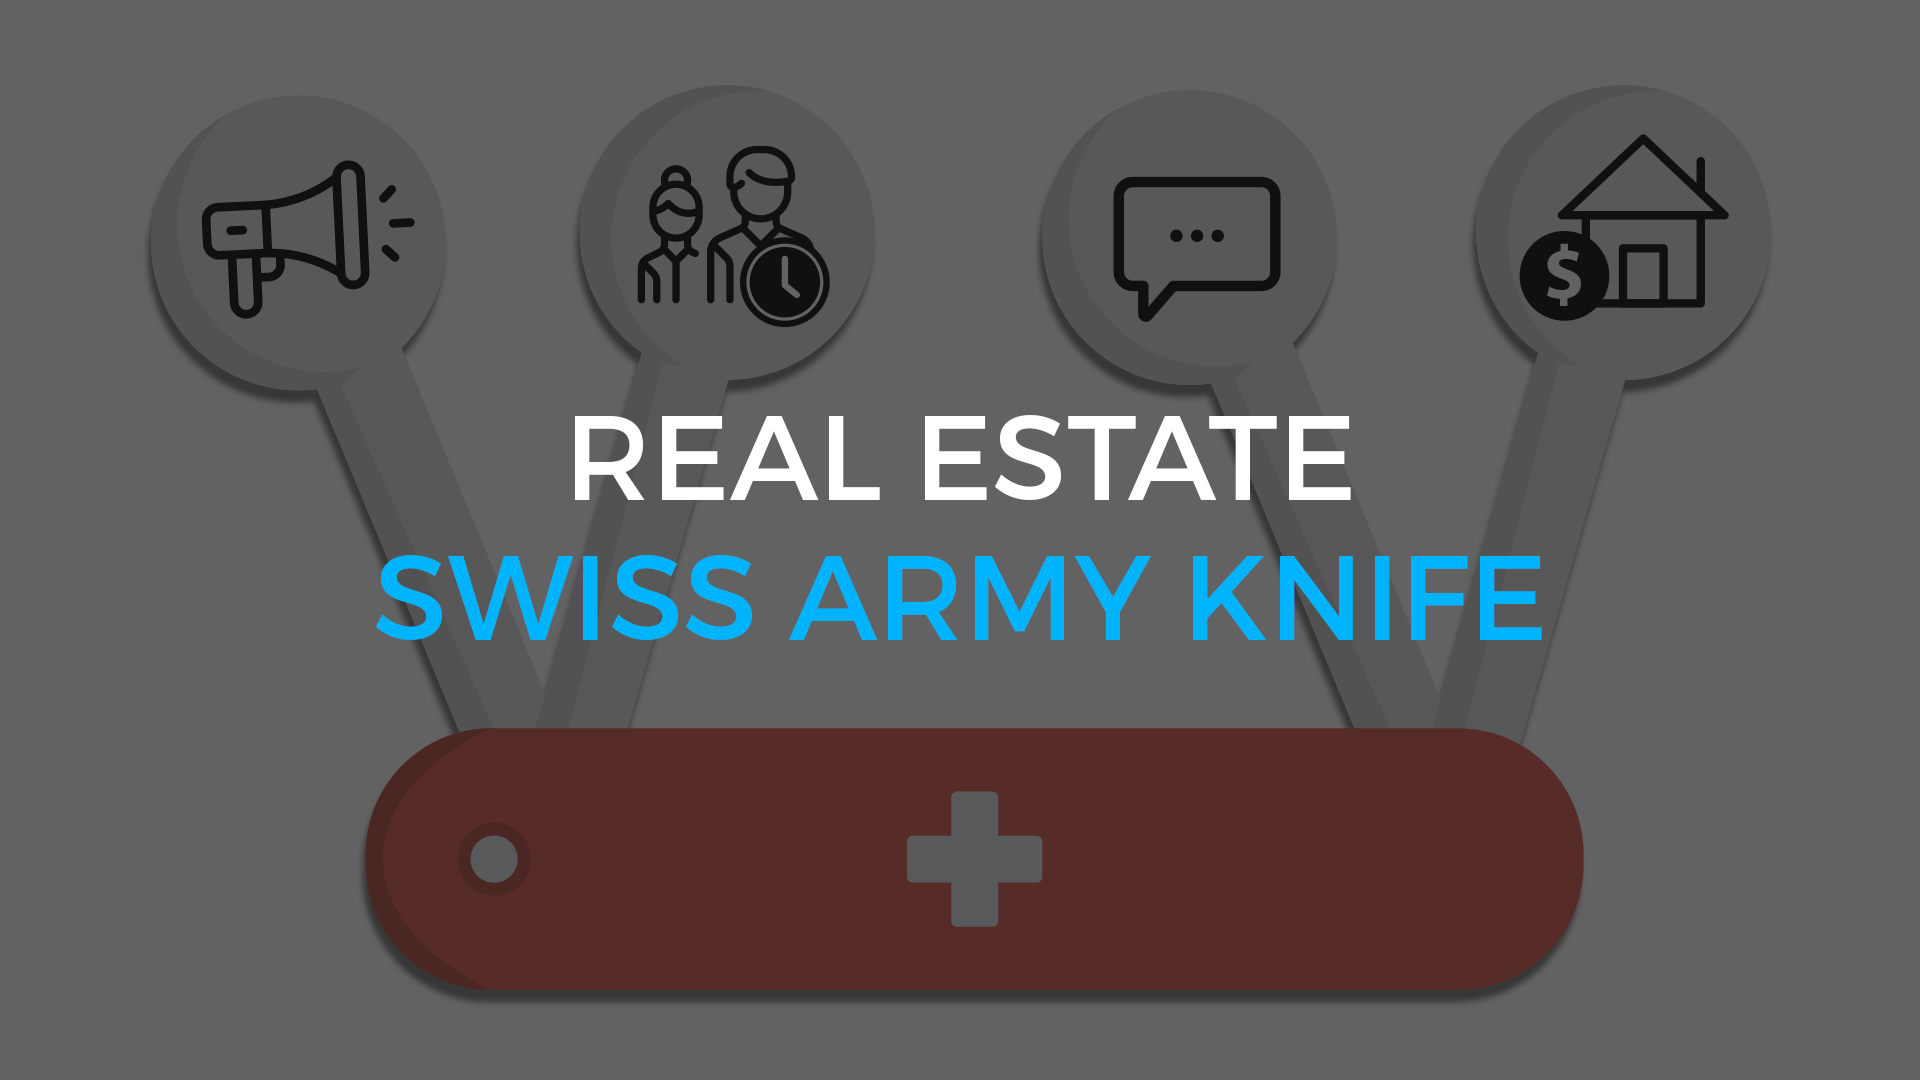 Dynamic Digital Signage: A Veritable Swiss Army Knife for Real Estate